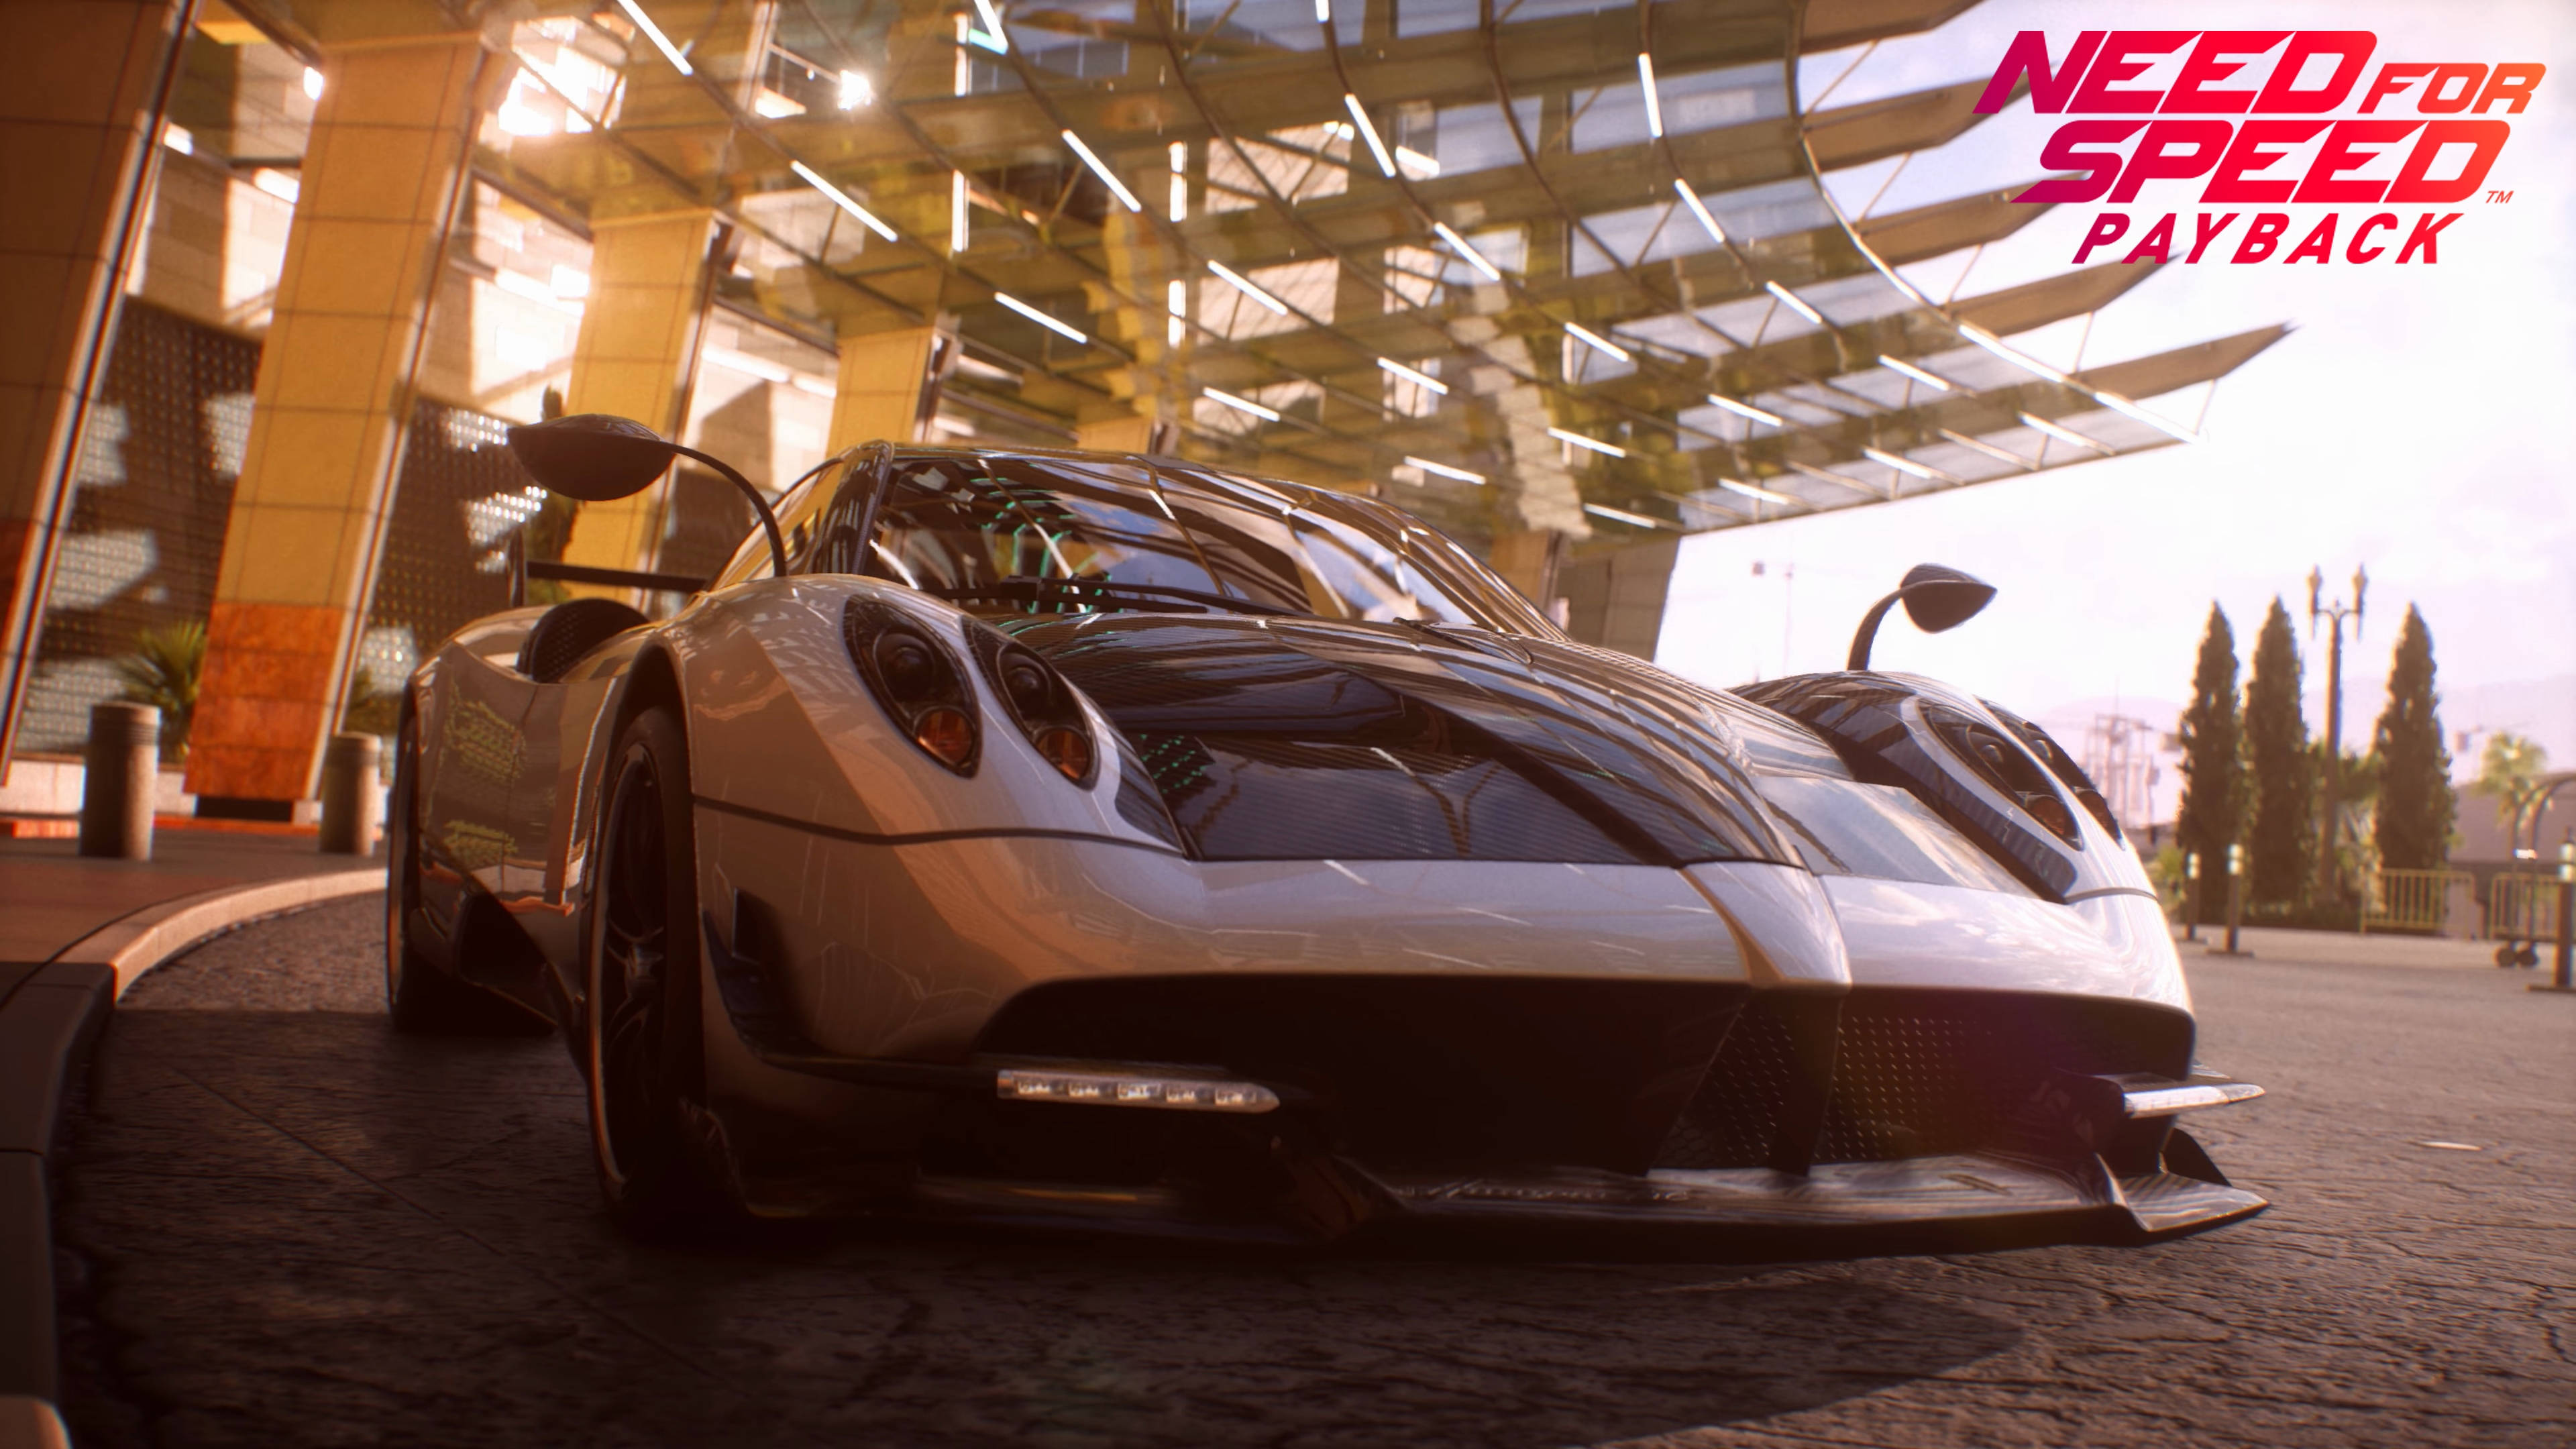 Need for speed playback. Need for Speed: Payback. Pagani Huayra NFS. Пагани NFS Payback. Нфс 2017 Payback.